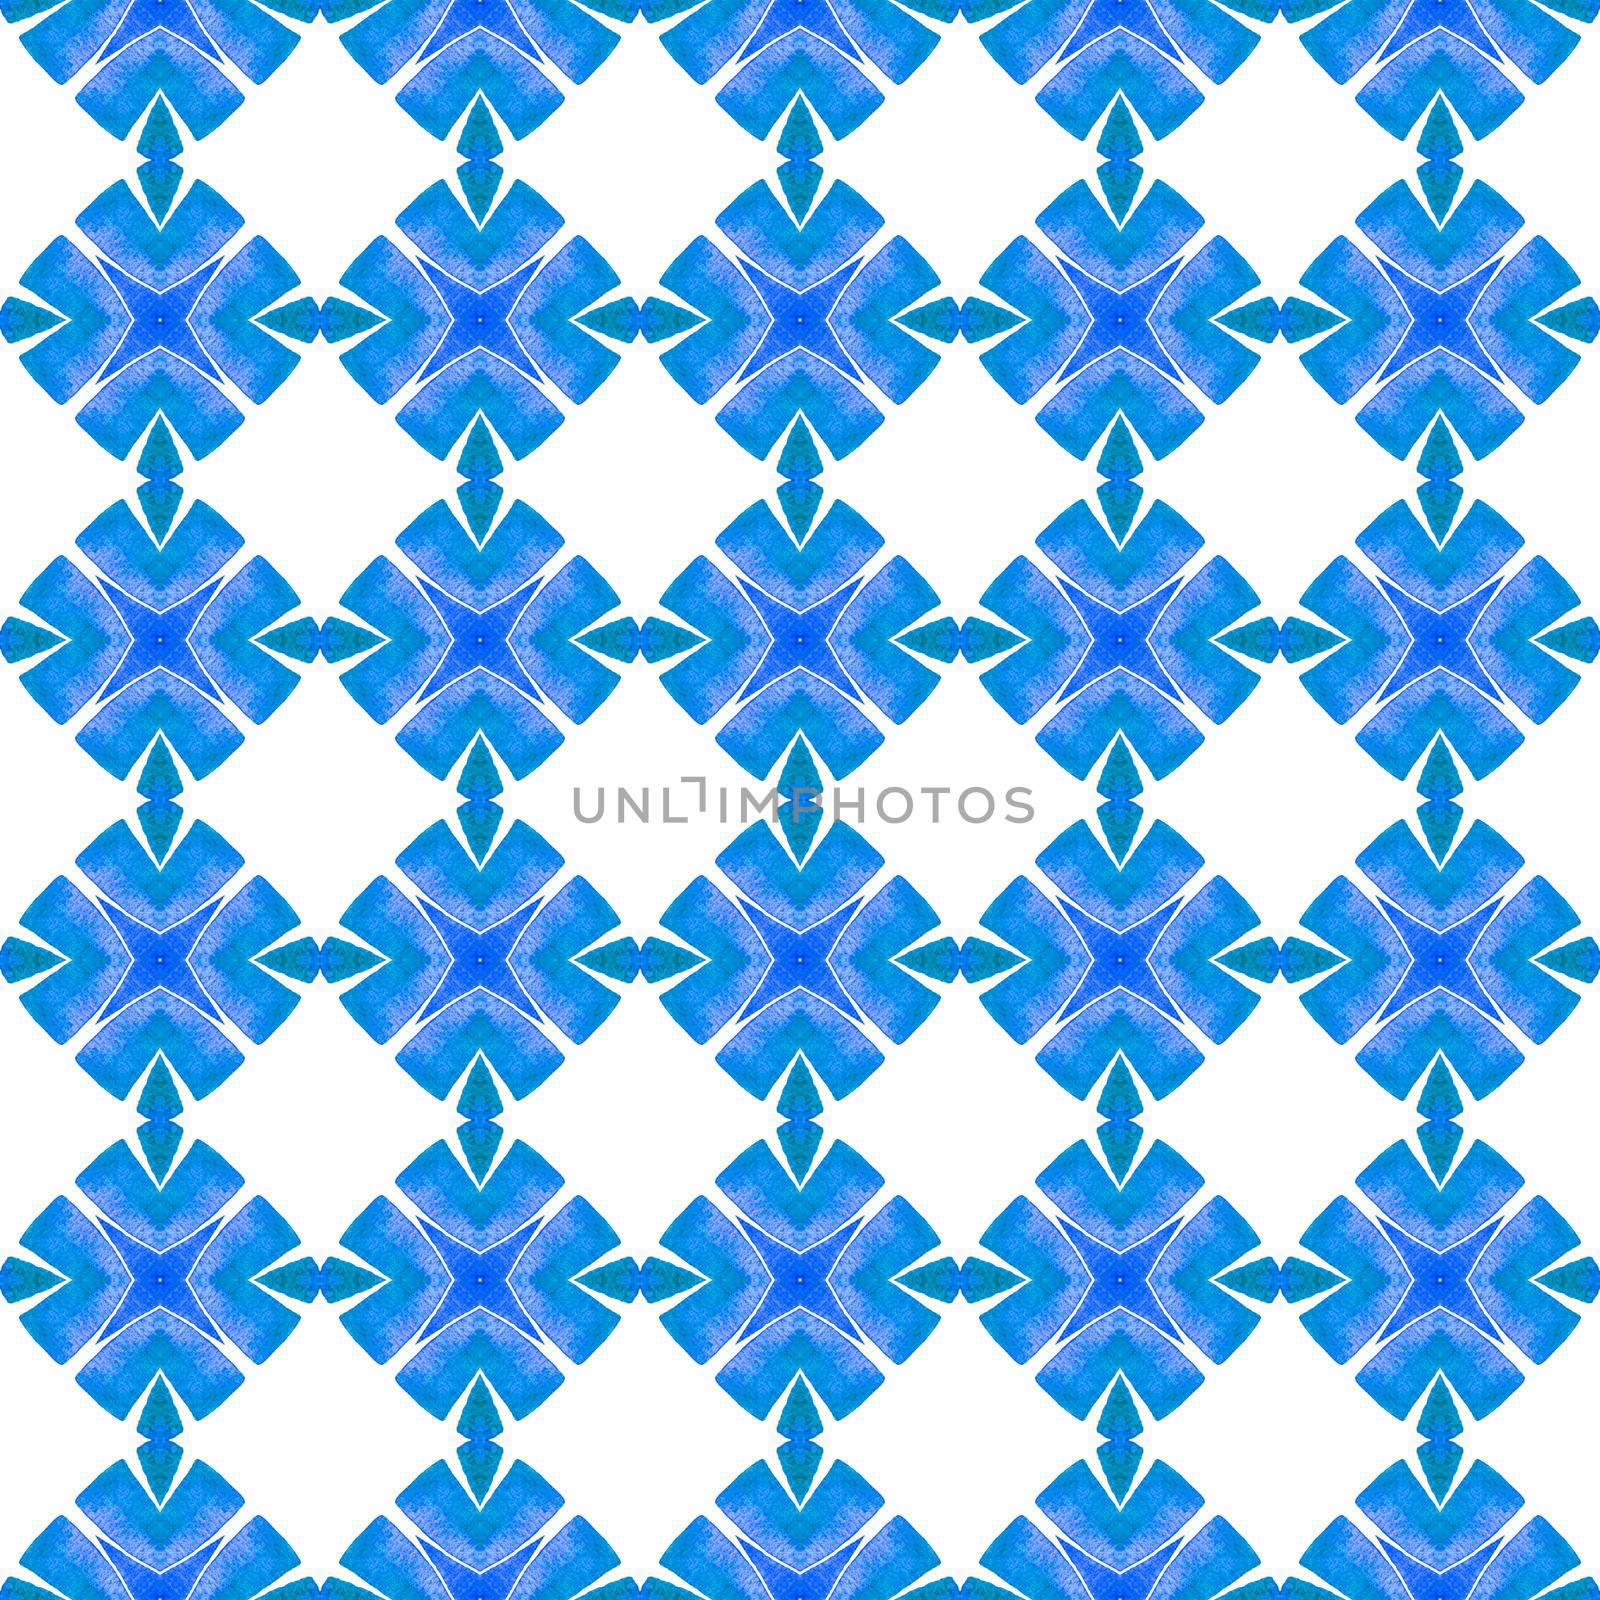 Watercolor medallion seamless border. Blue worthy boho chic summer design. Textile ready curious print, swimwear fabric, wallpaper, wrapping. Medallion seamless pattern.